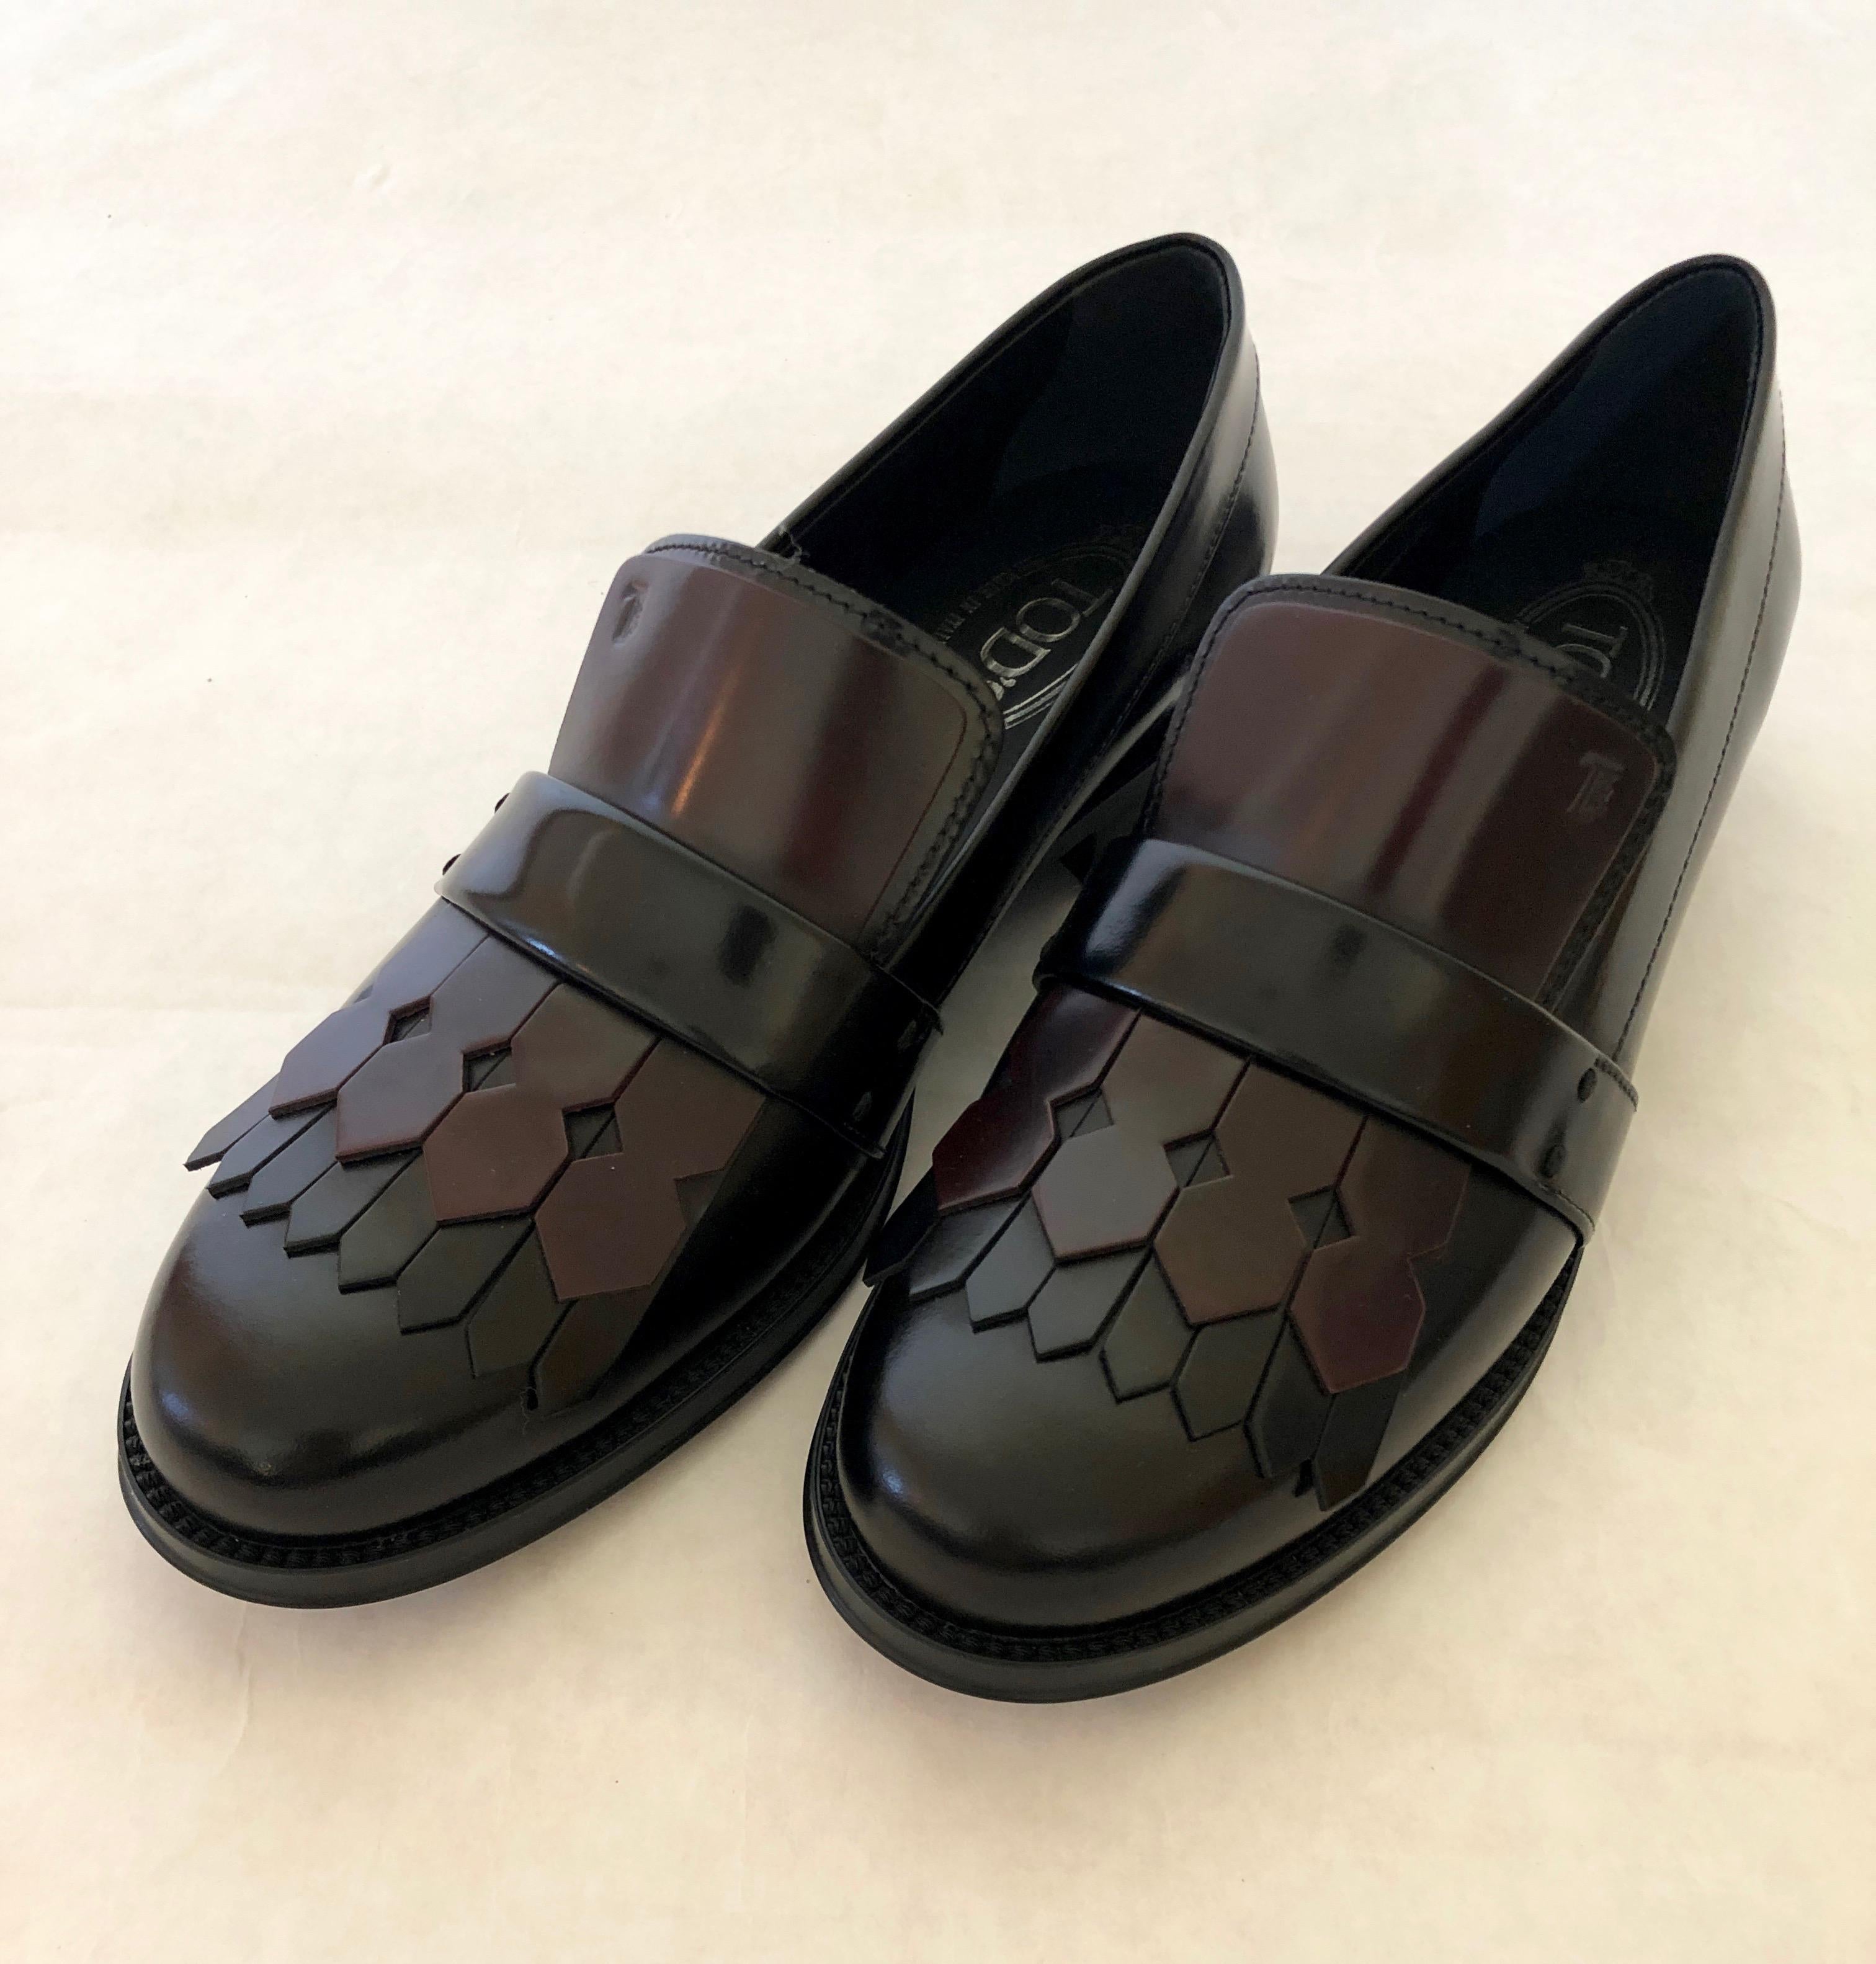 Pair of Tod's Cordovan (Burgundy) & Black Leather Kiltie Tassel Flap Loafers  For Sale 2